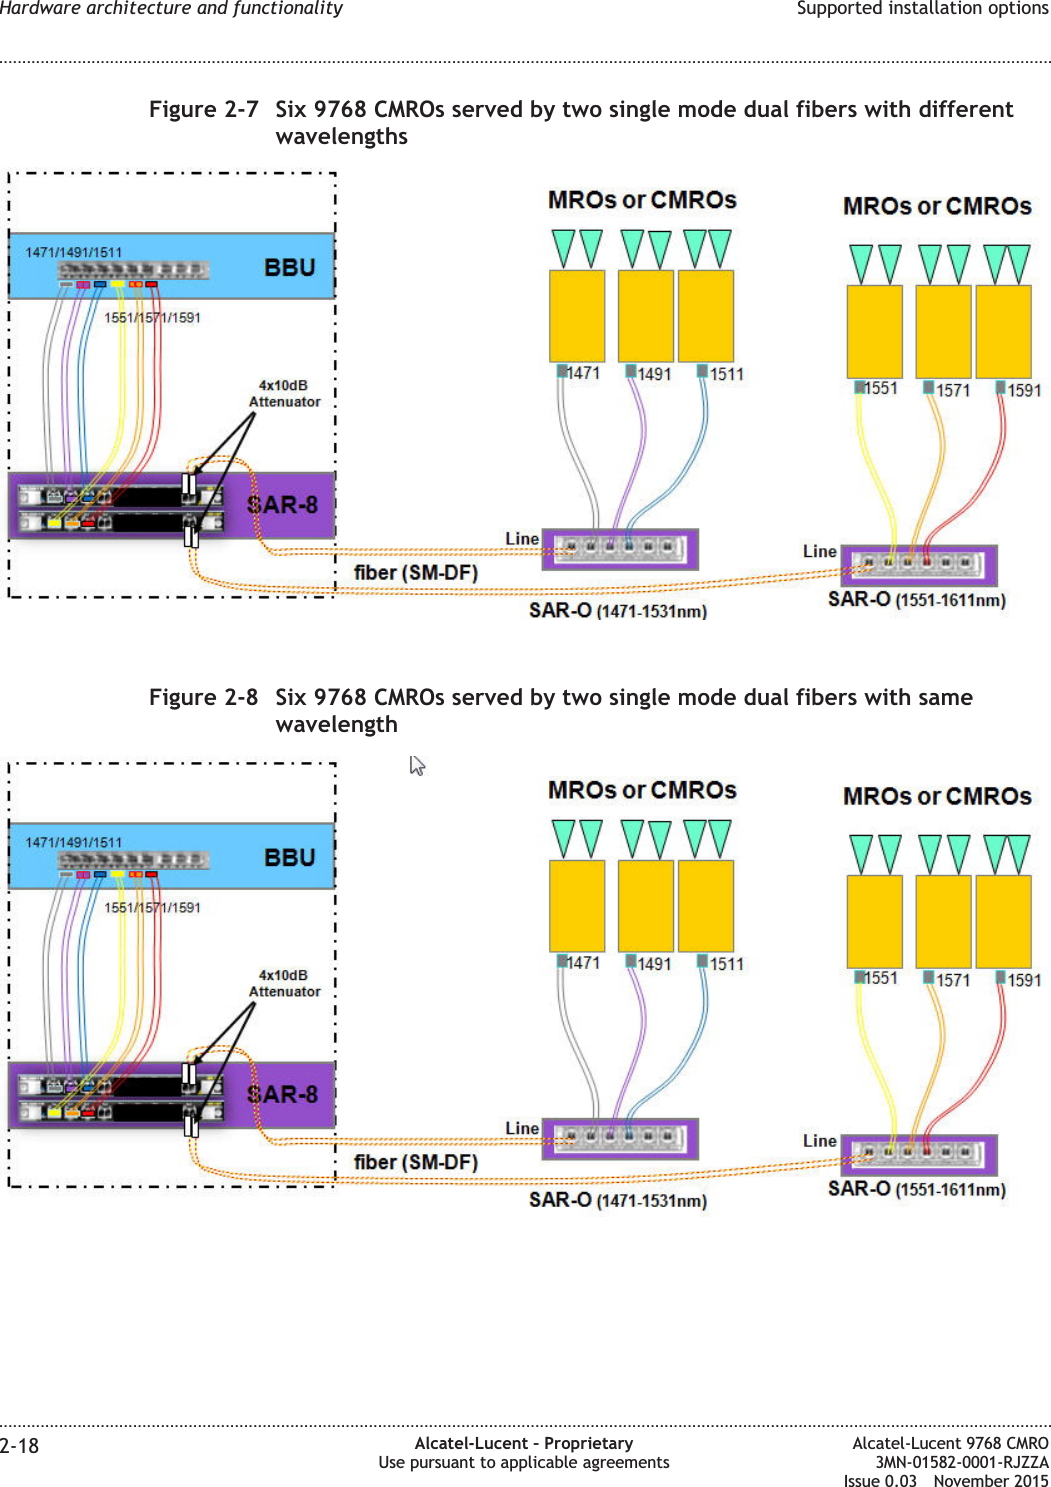 Figure 2-7 Six 9768 CMROs served by two single mode dual fibers with differentwavelengthsFigure 2-8 Six 9768 CMROs served by two single mode dual fibers with samewavelengthHardware architecture and functionality Supported installation options........................................................................................................................................................................................................................................................................................................................................................................................................................................................................2-18 Alcatel-Lucent – ProprietaryUse pursuant to applicable agreementsAlcatel-Lucent 9768 CMRO3MN-01582-0001-RJZZAIssue 0.03 November 2015DRAFTDRAFT